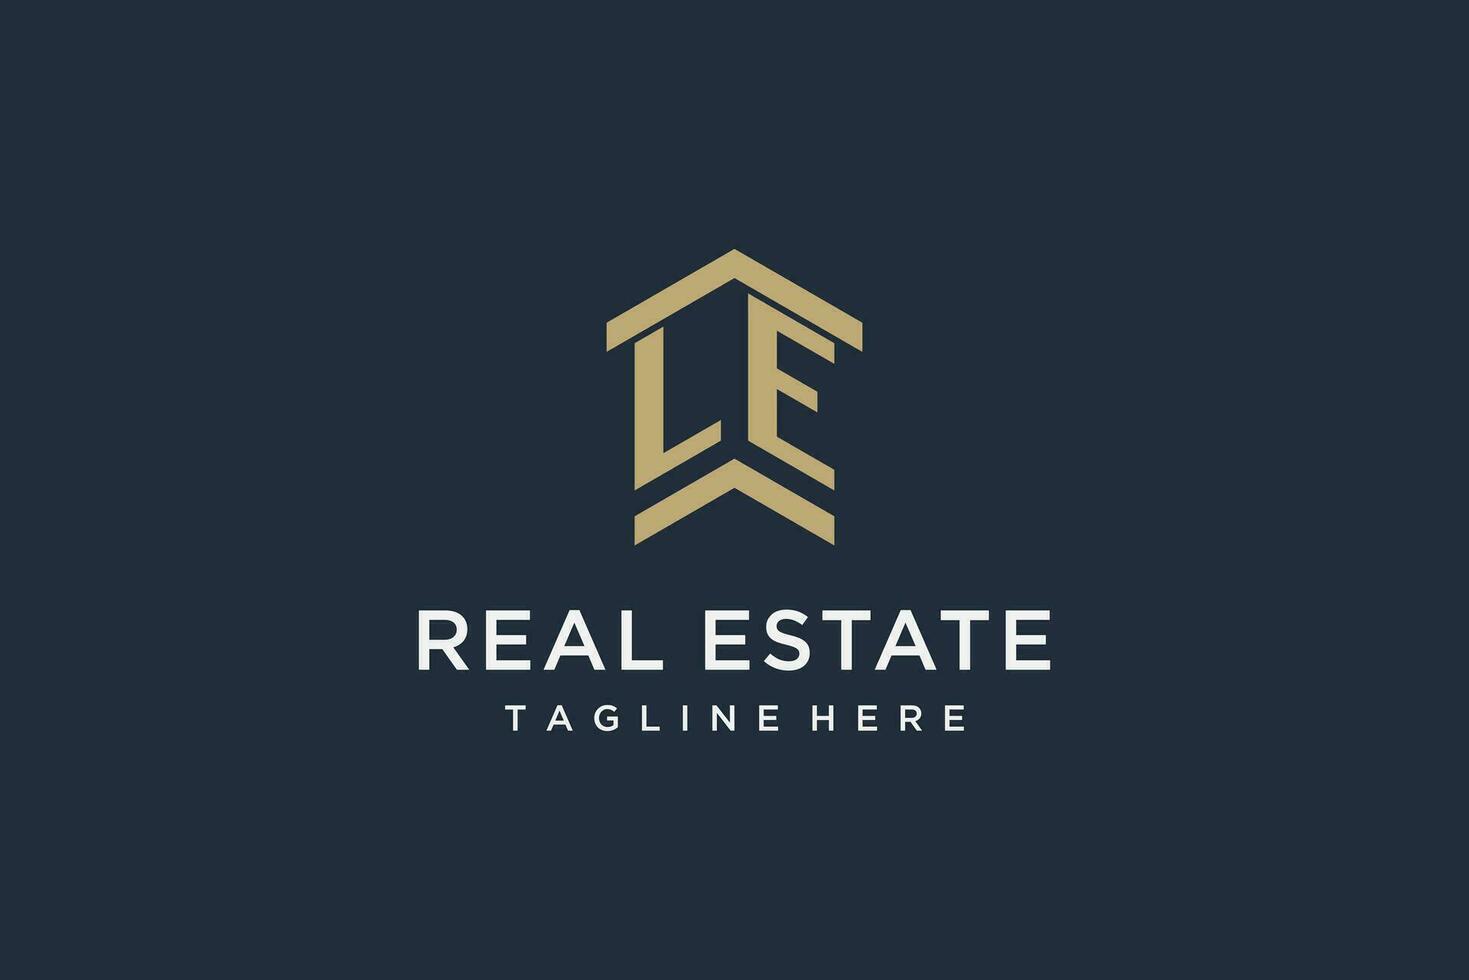 Initial LE logo for real estate with simple and creative house roof icon logo design ideas vector